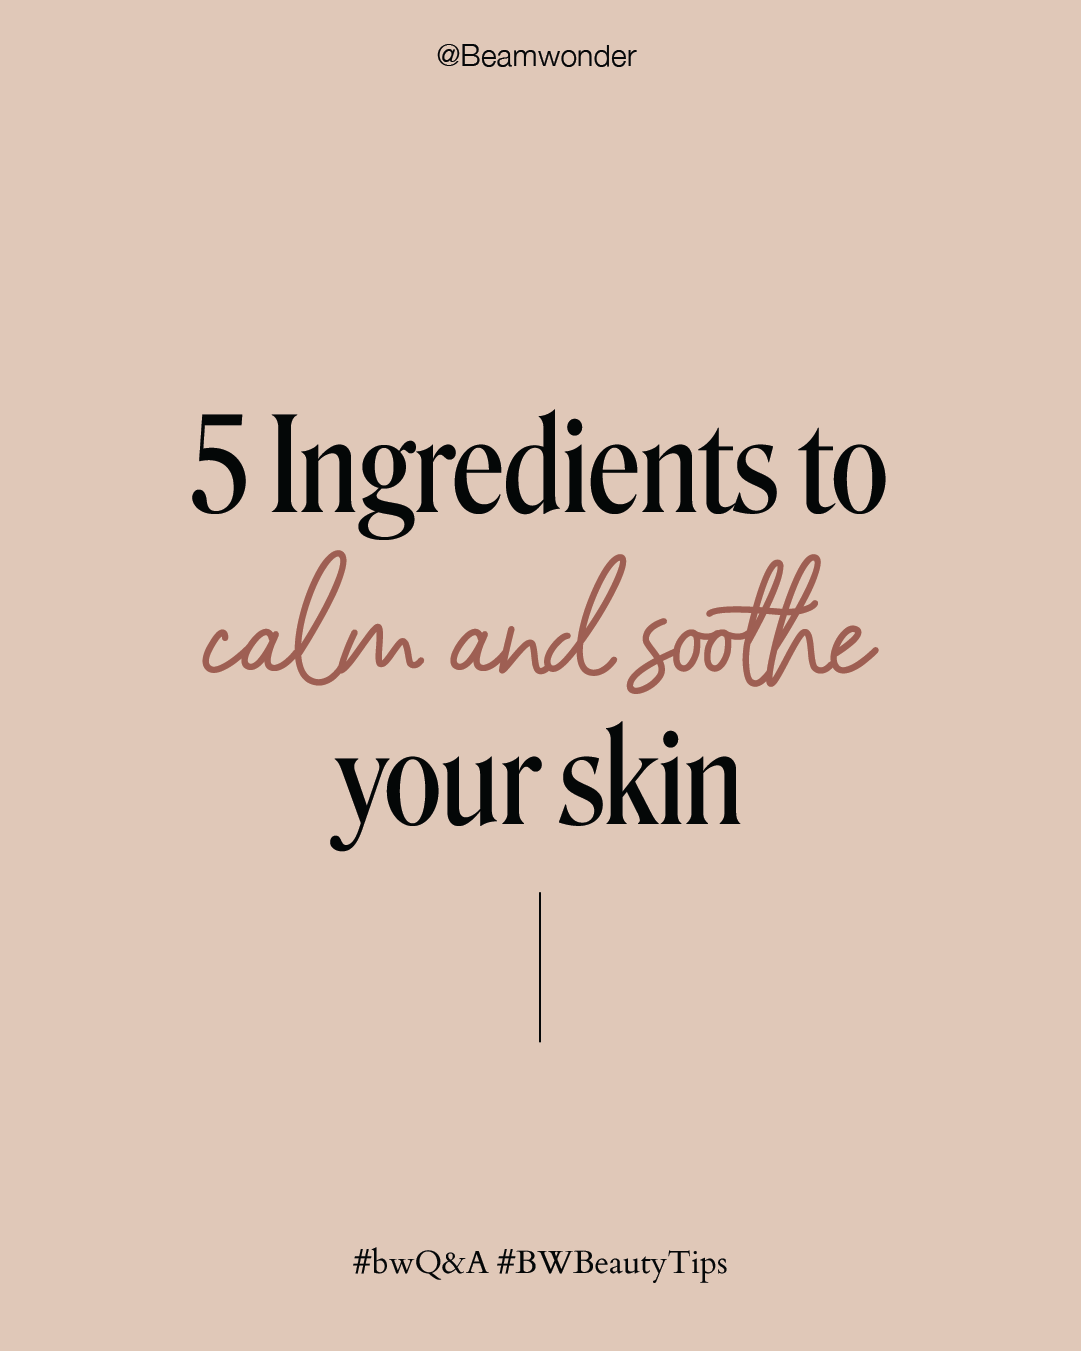 5 Ingredients to calm and soothe your skin